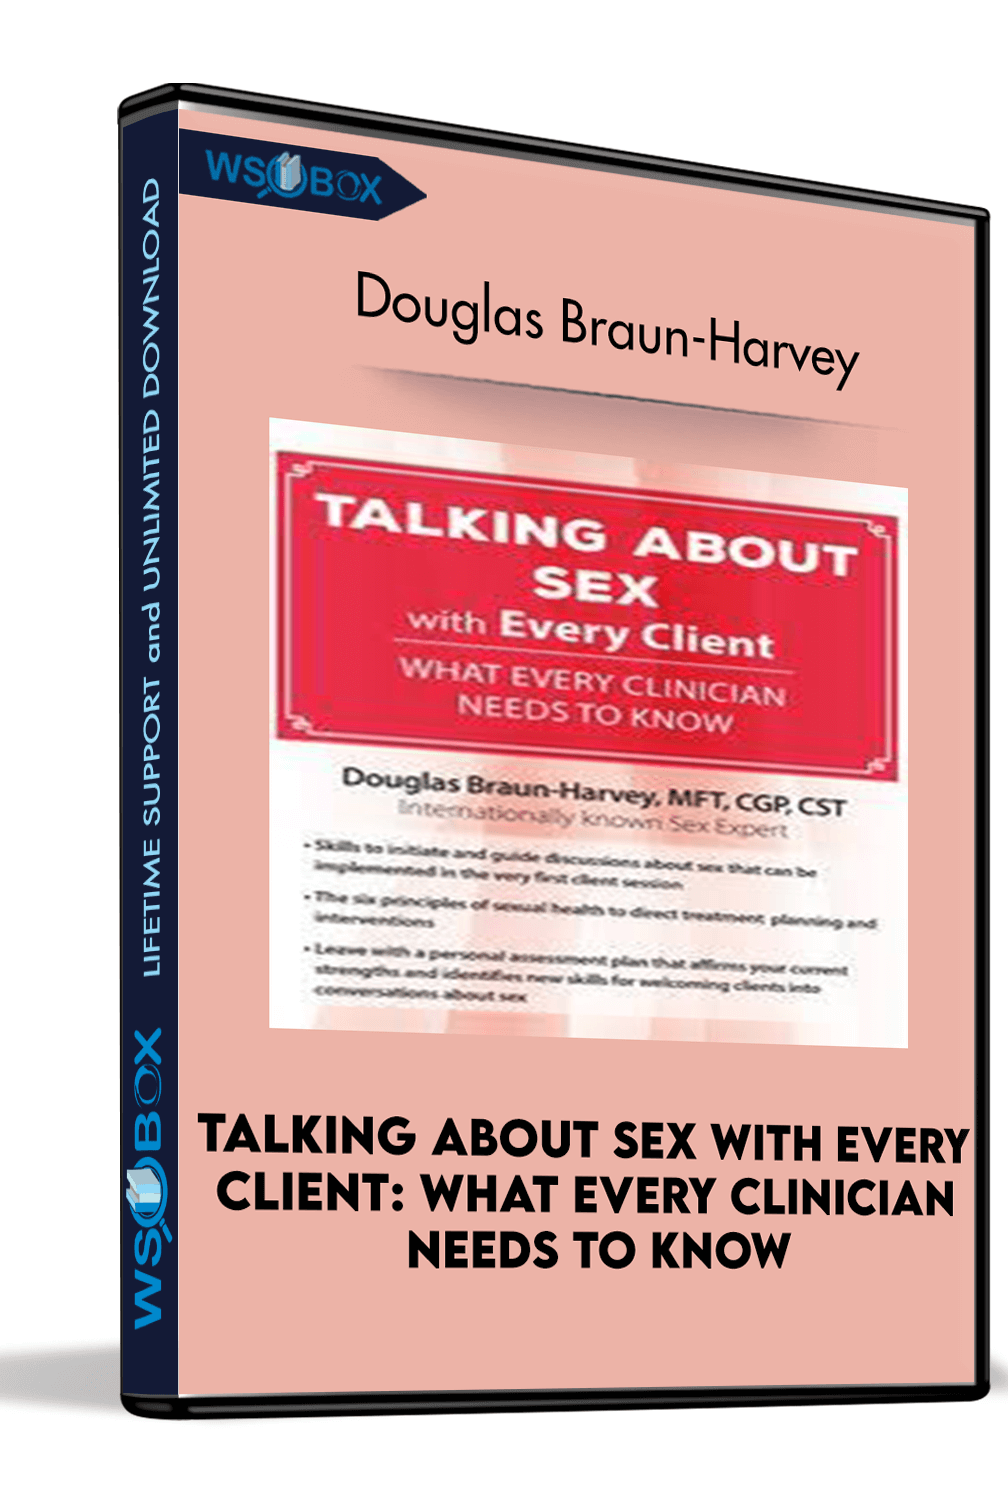 talking-about-sex-with-every-client-what-every-clinician-needs-to-know-douglas-braun-harvey